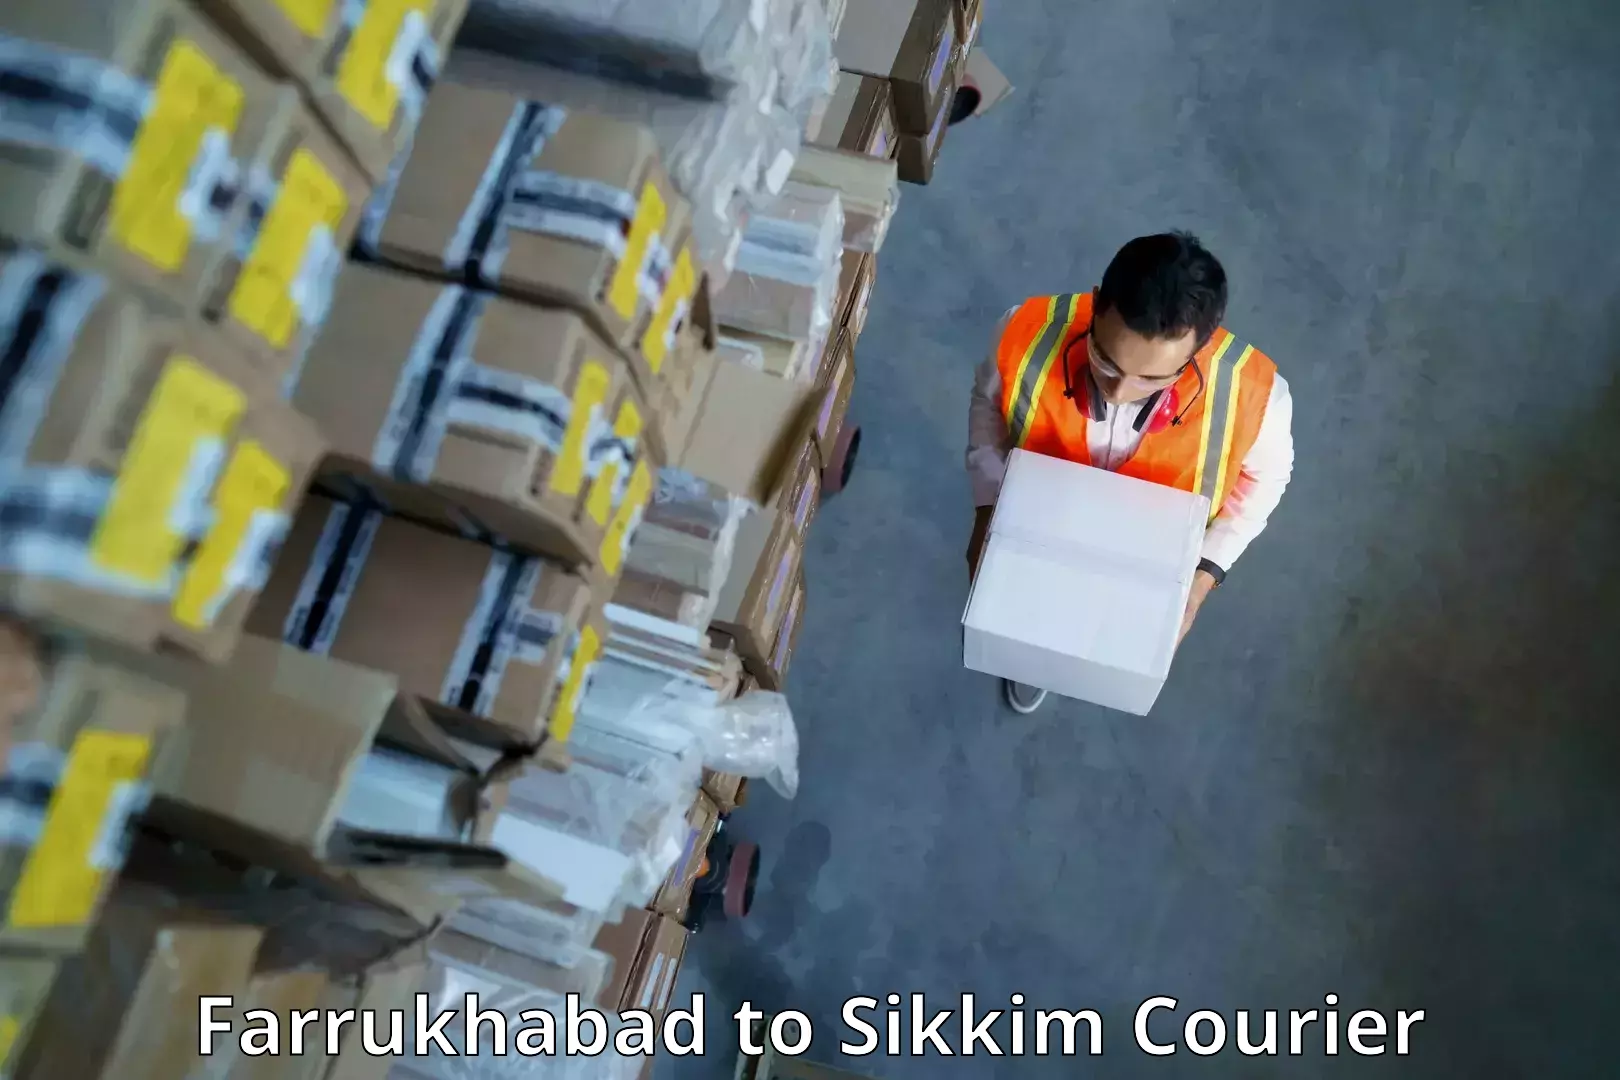 Customer-focused courier Farrukhabad to Gangtok